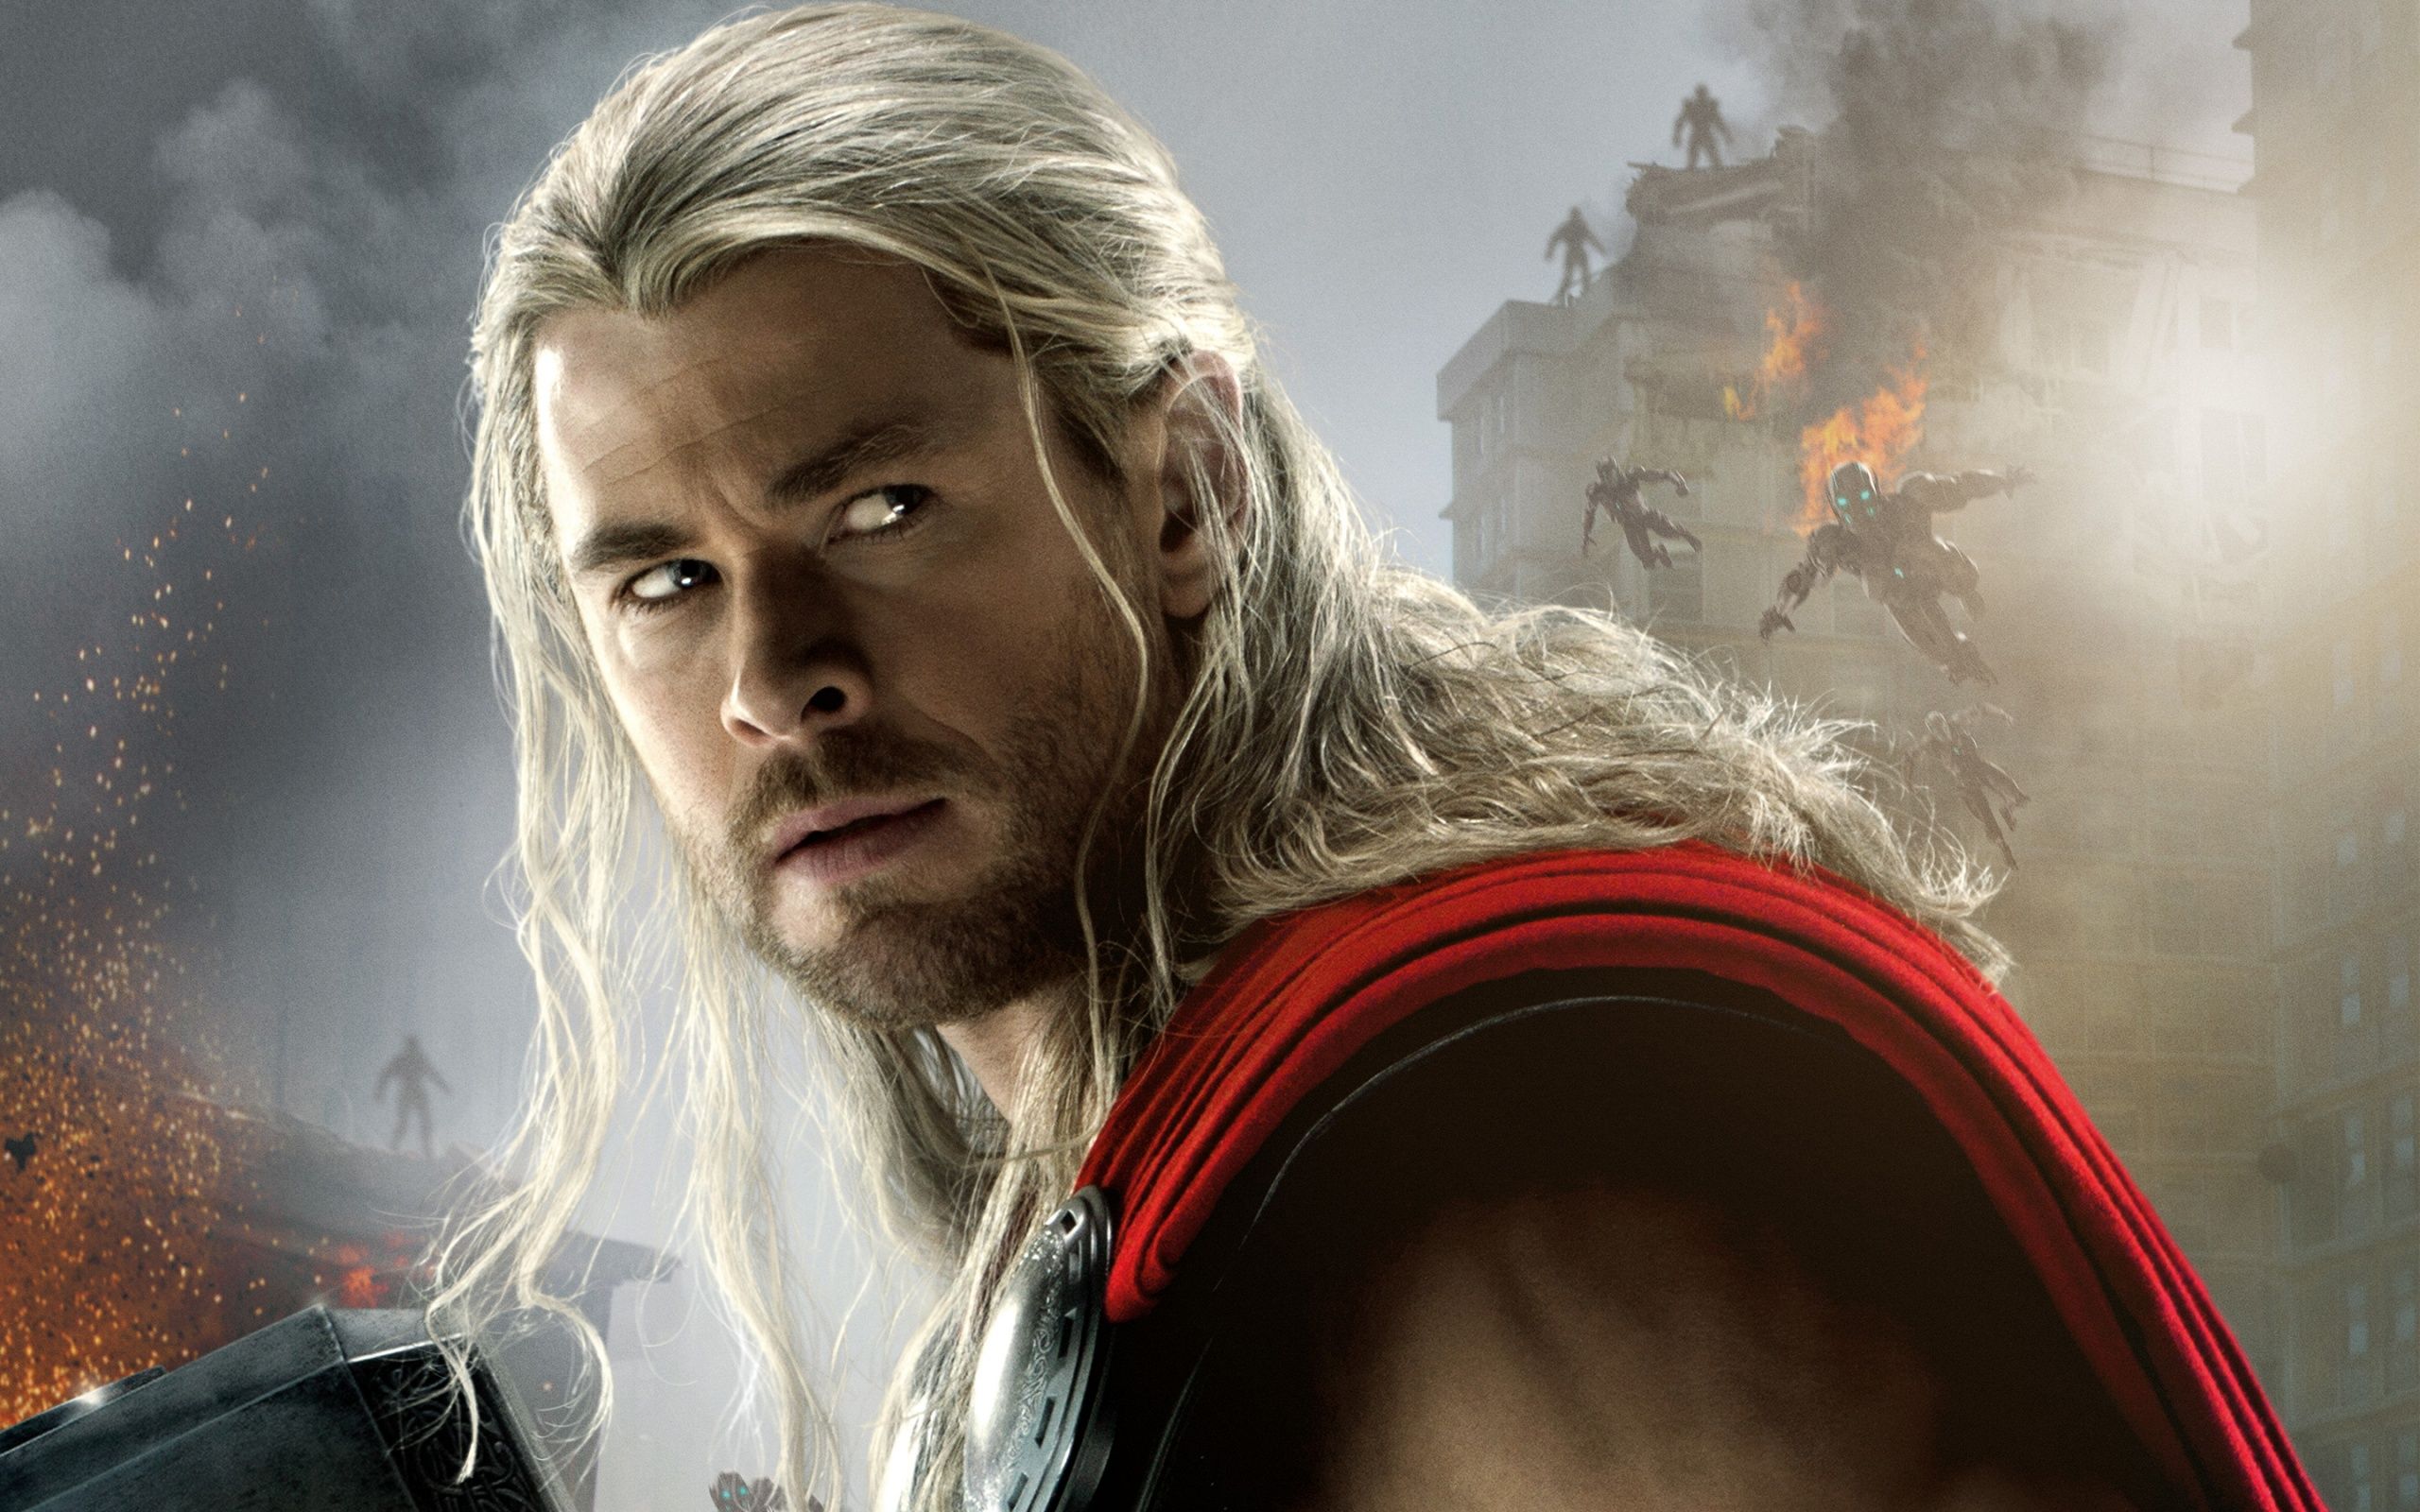 Thor Avengers Age of Ultron Wallpaper in jpg format for free download